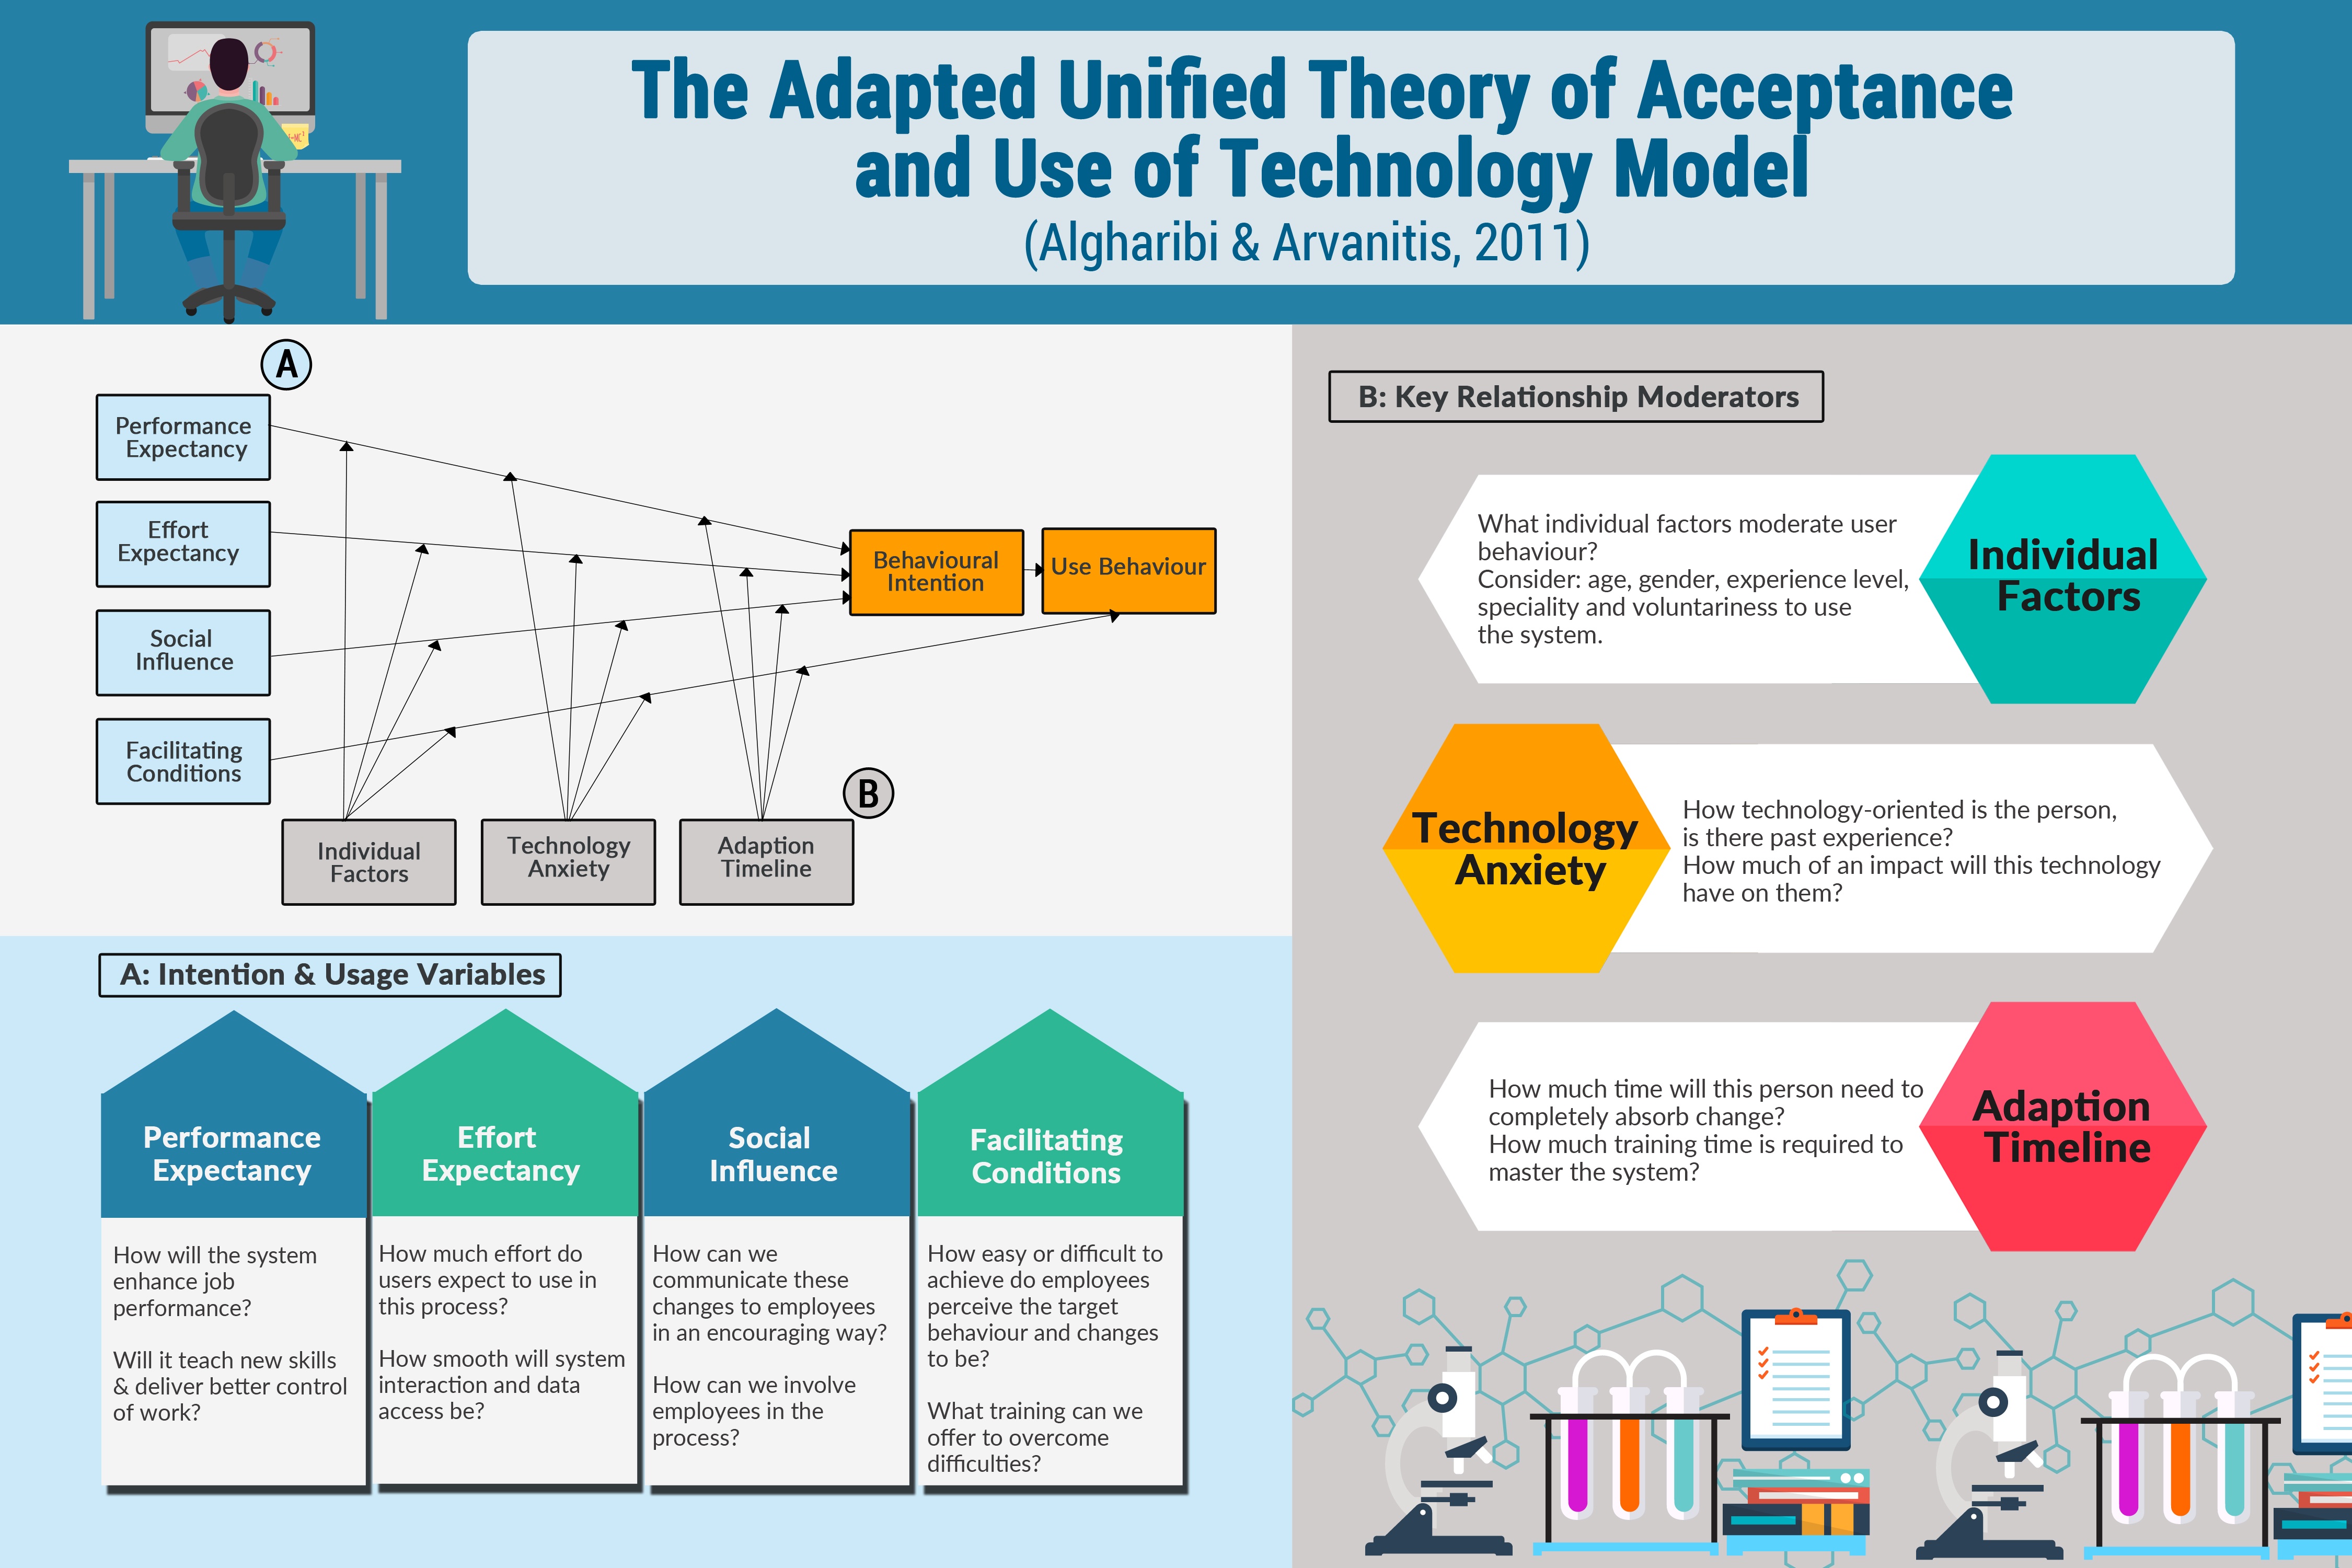 The Adapted Unified Theory of Acceptance and Use of Technology Model